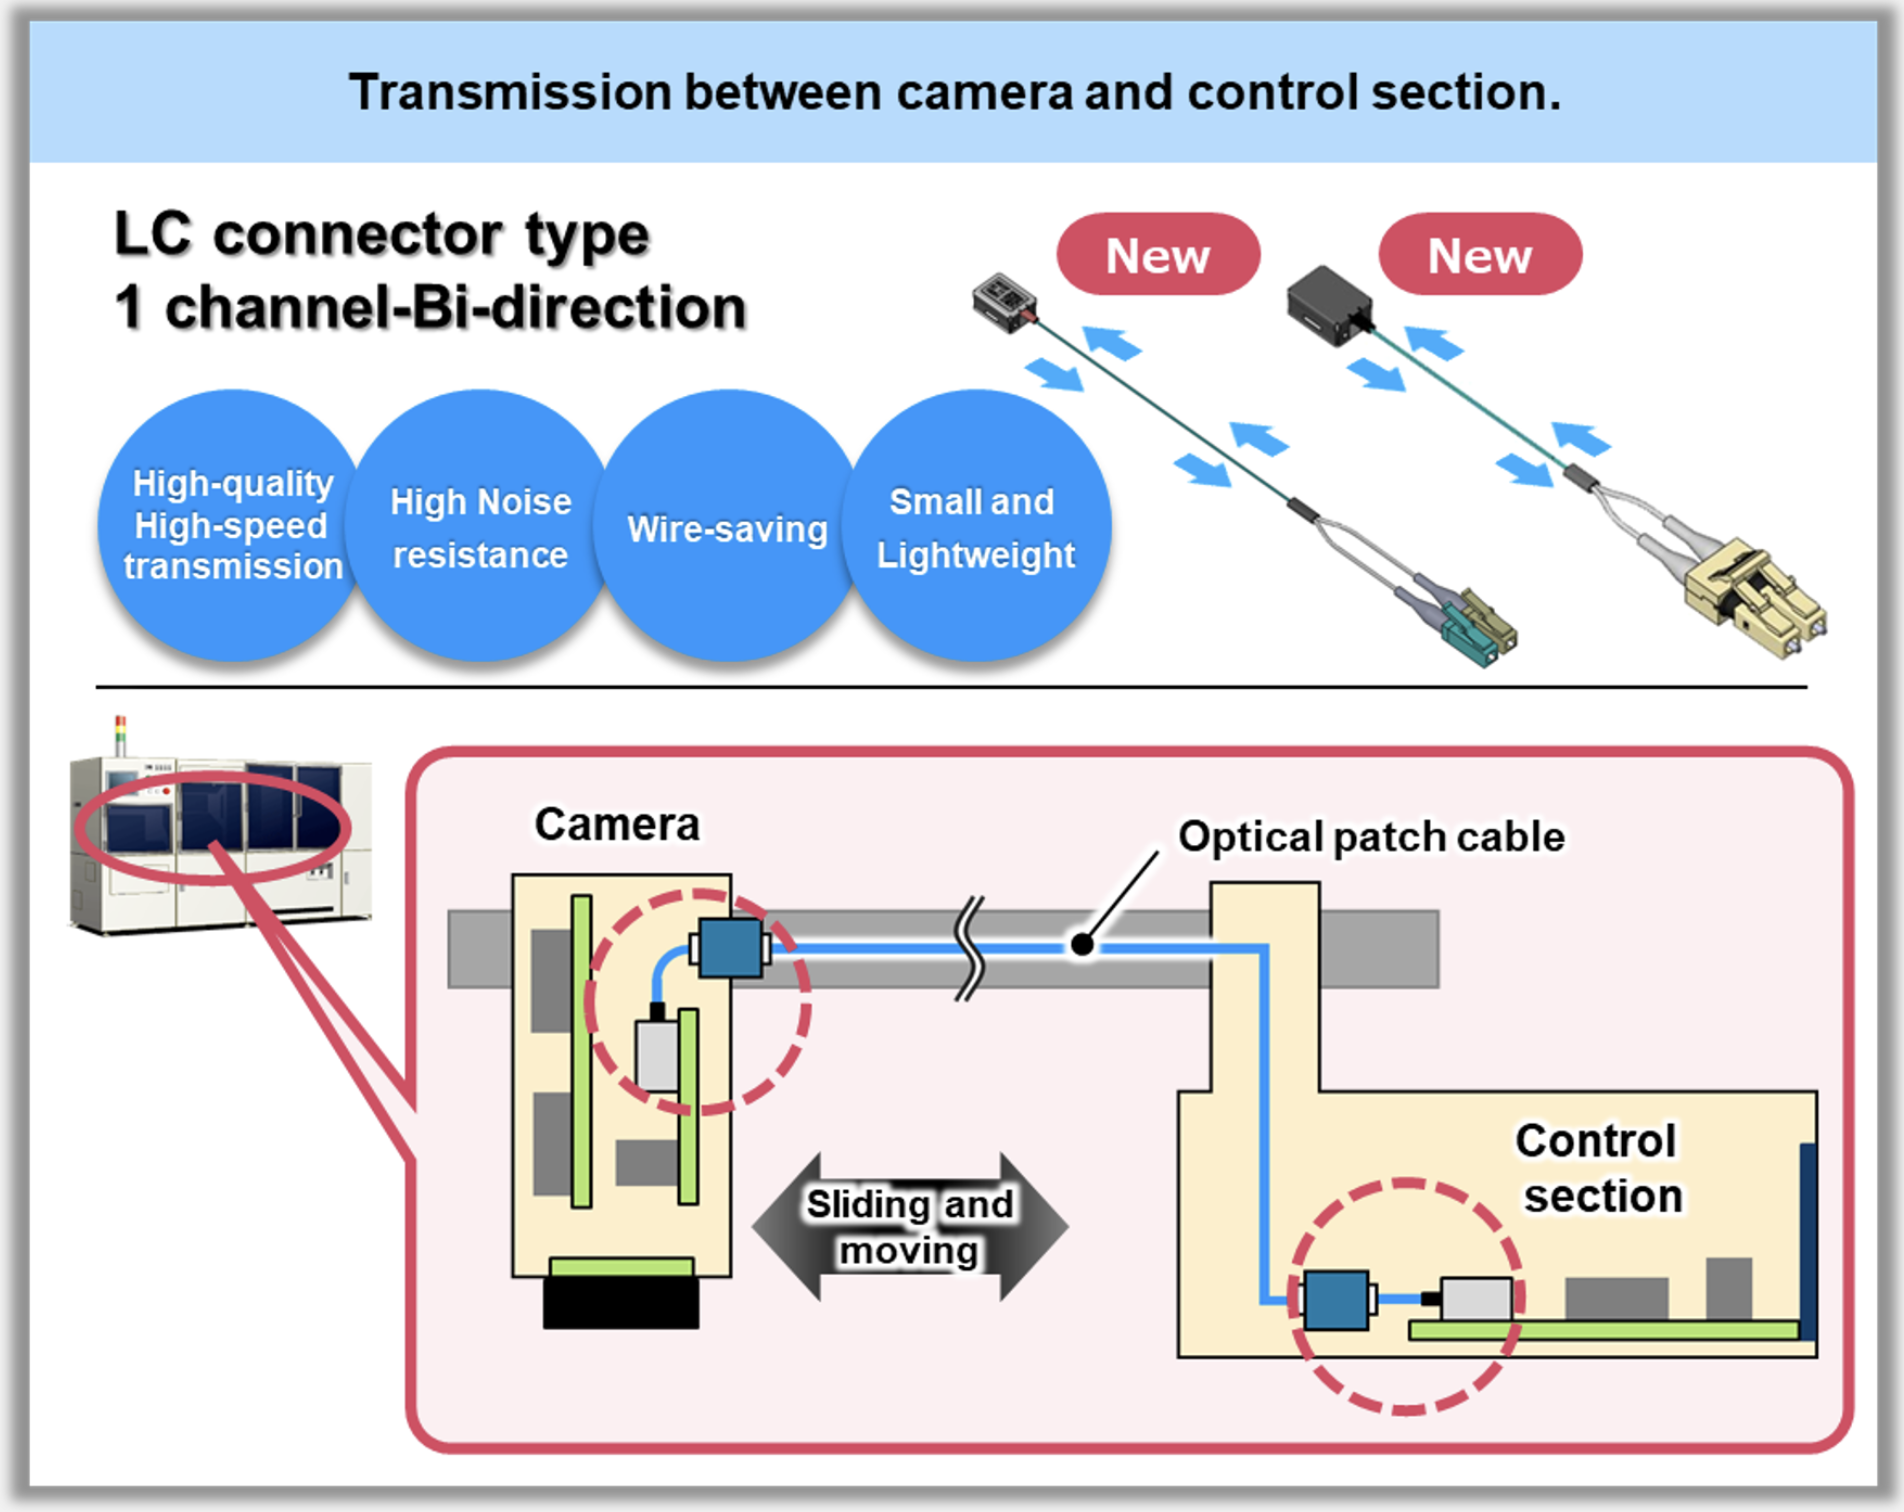 Active Optical Connector V series (AOC) Case Study Visual inspection equipment: Transmission between camera and control section., High-quality High-speed transmission, High Noise resistance, Wire-saving, Small and Lightweight.